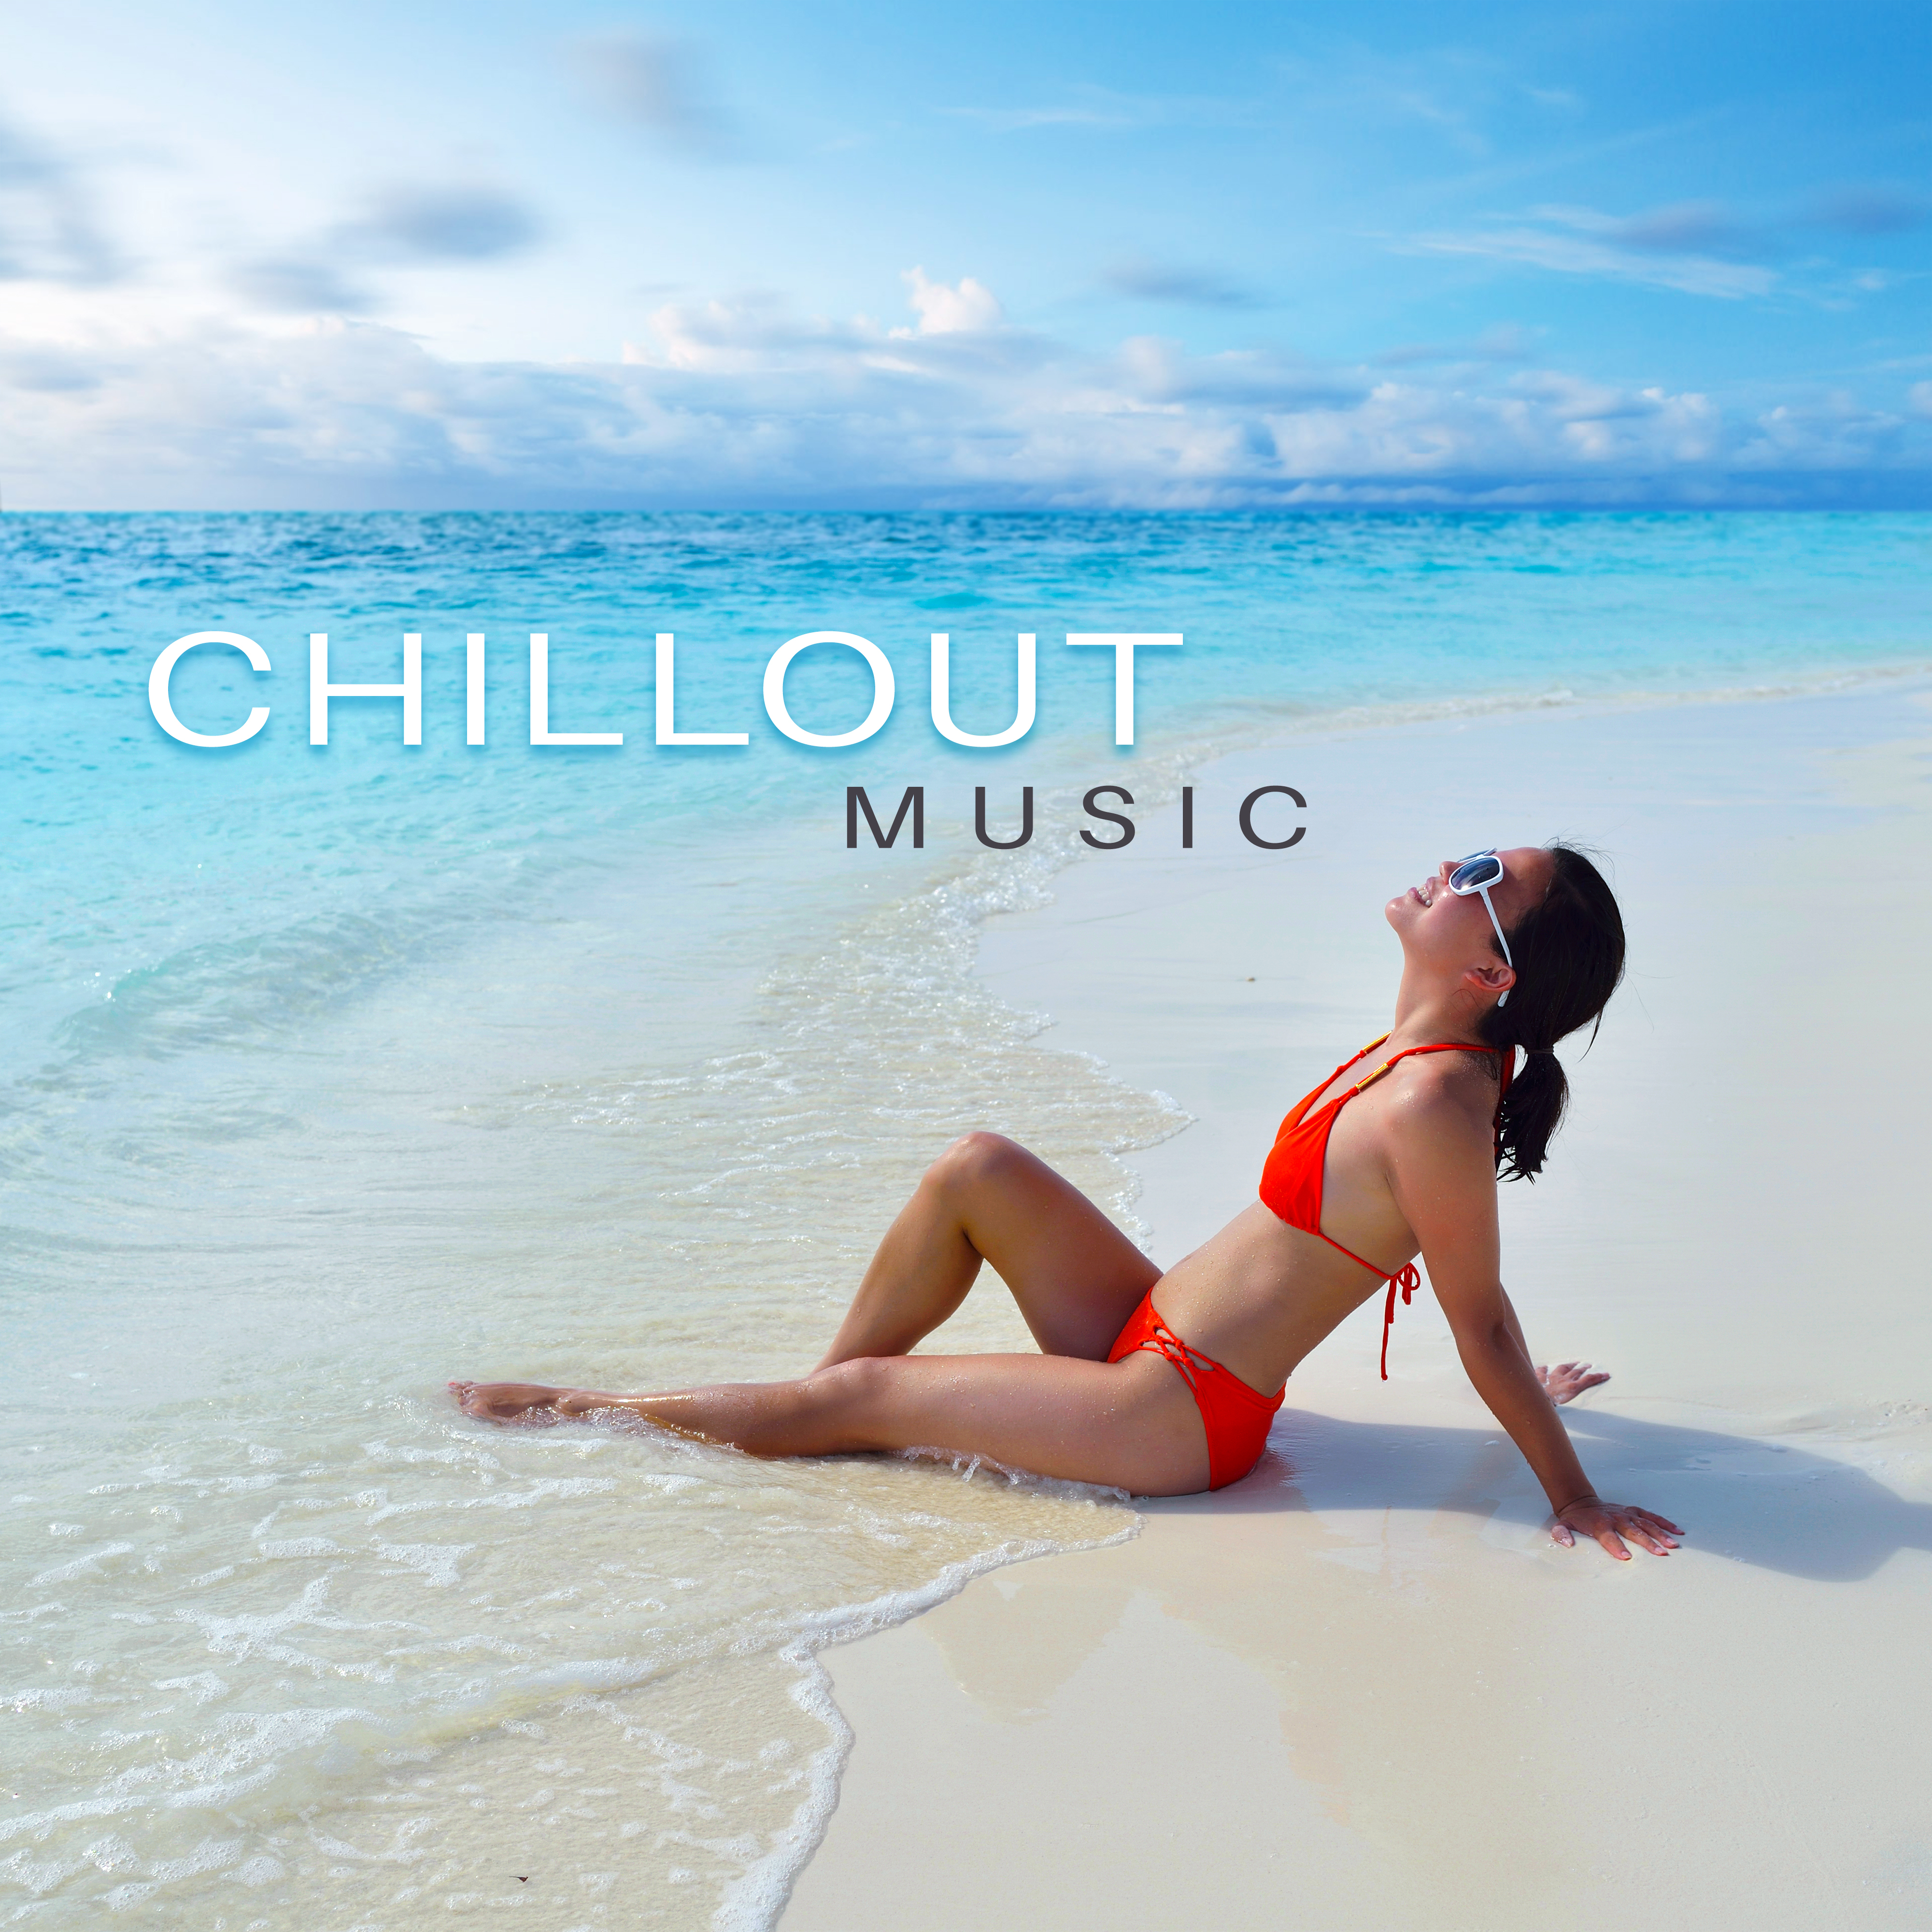 Chillout Music  Chill Out 2017, Summer Music, Relax  Chill, Lounge, Chillout After Work